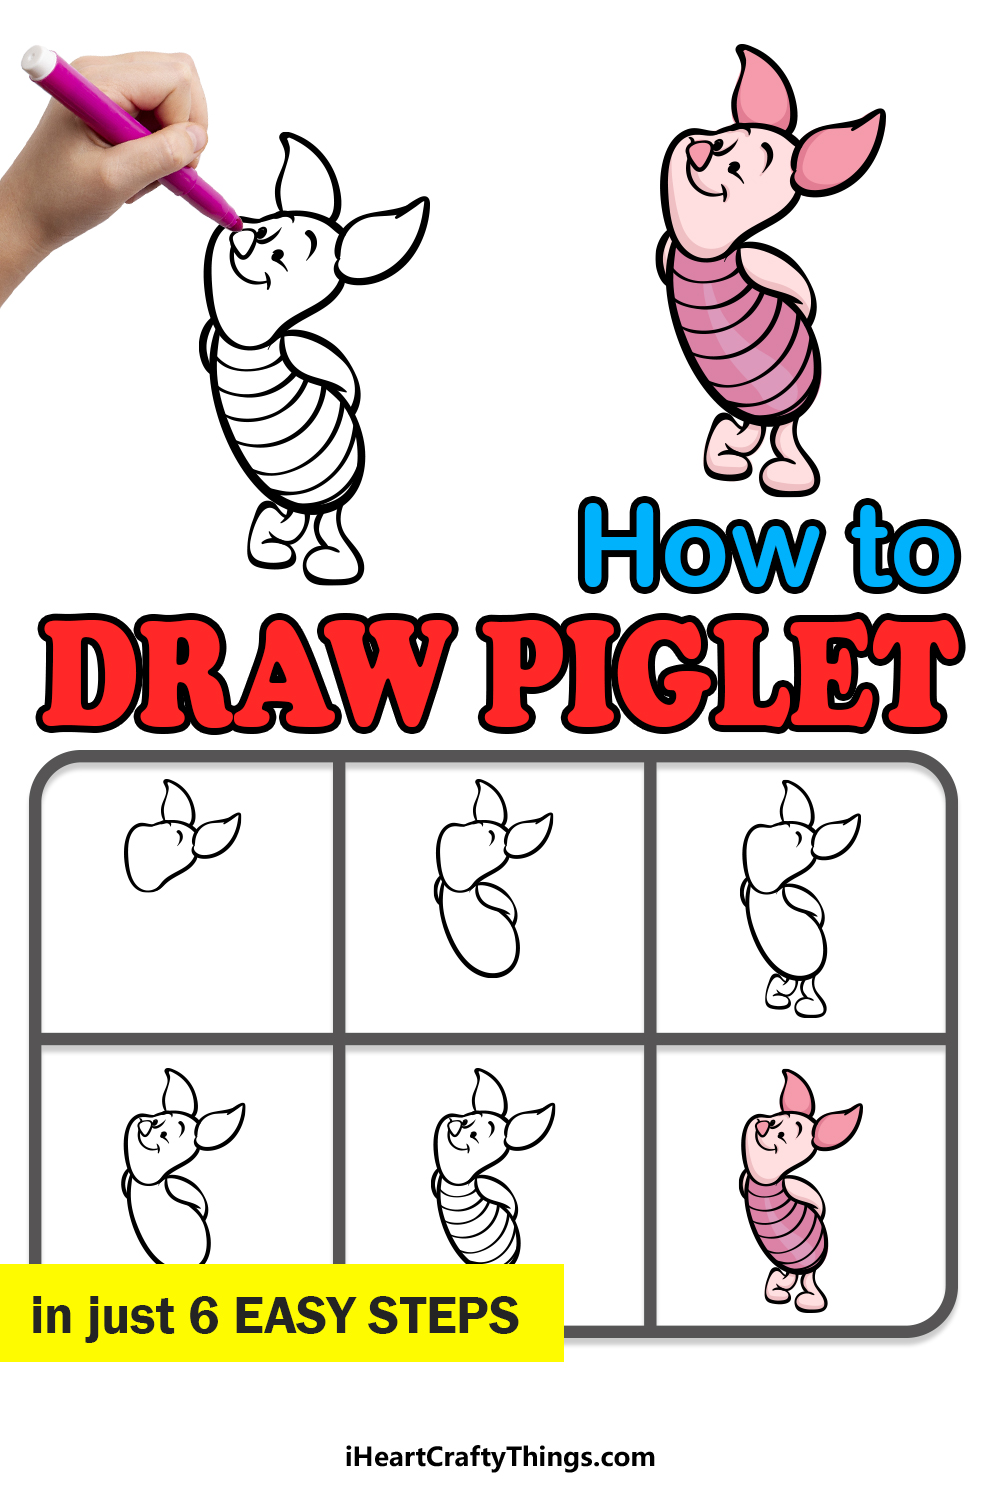 how to draw Piglet in 6 easy steps